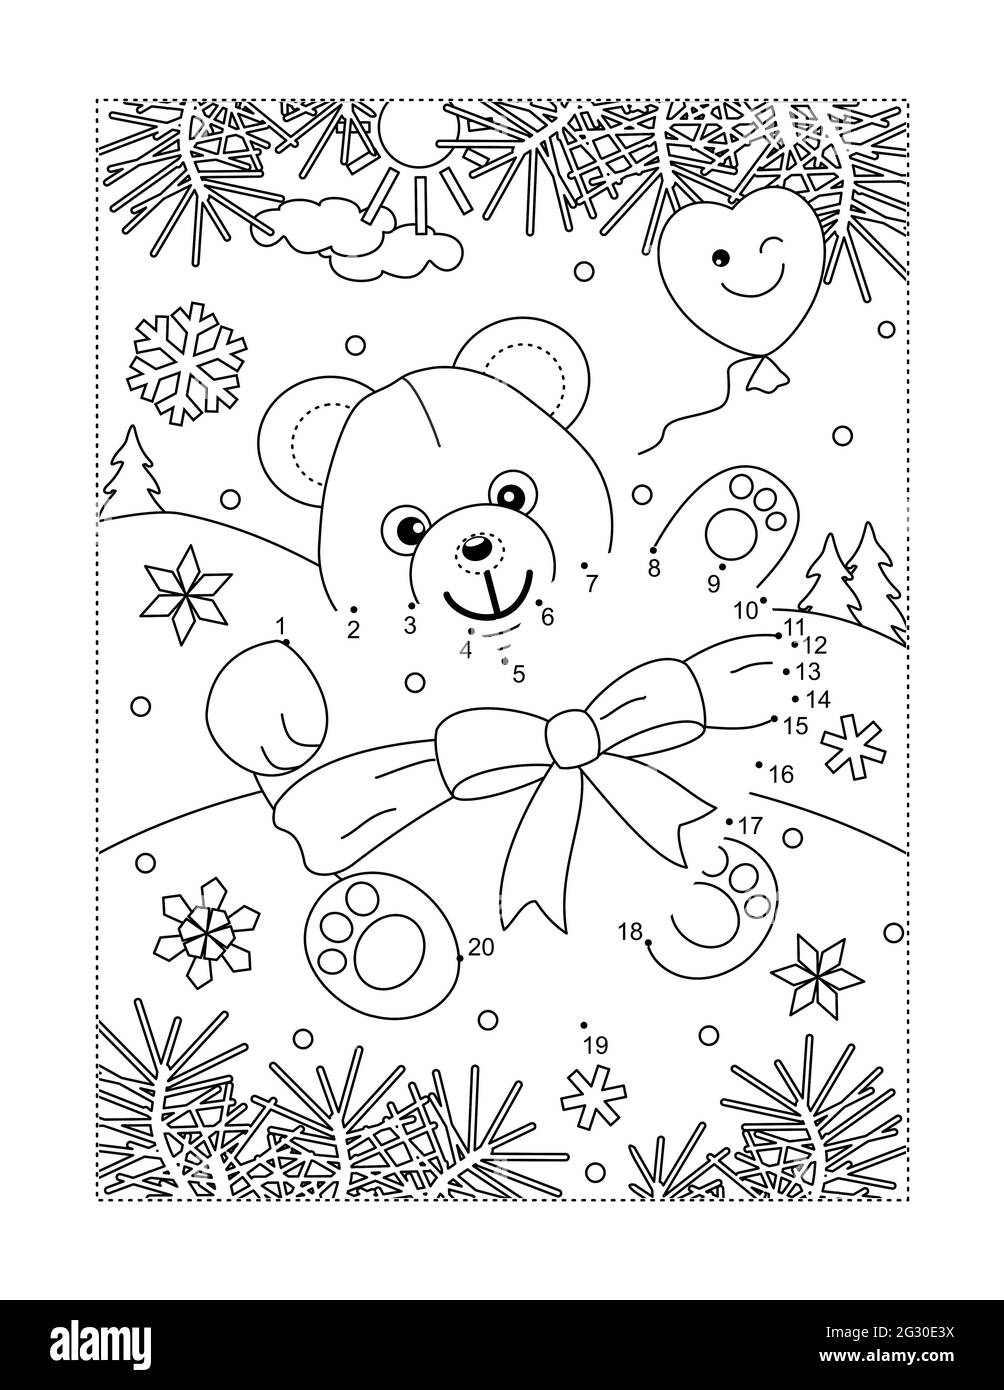 Valentine's Day teddy bear with big heart connect the dots puzzle and coloring page Stock Photo